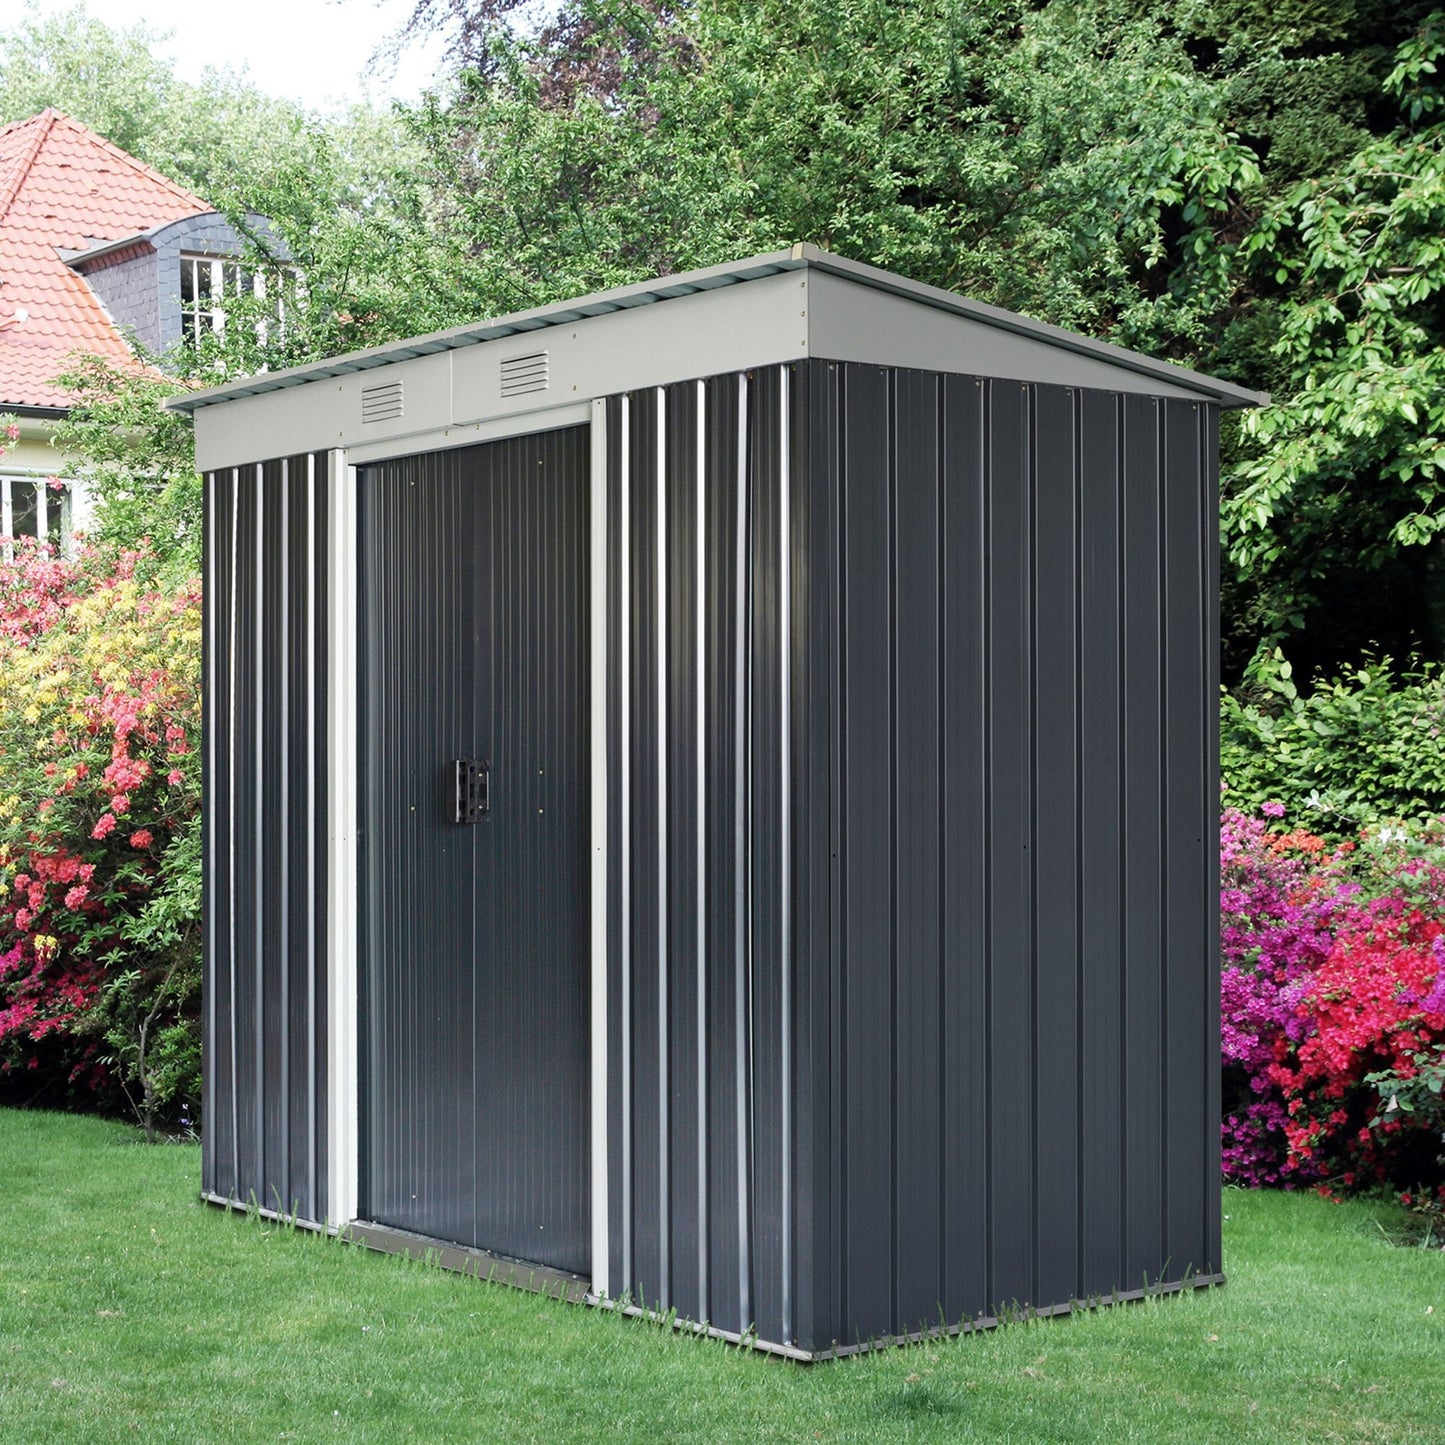 Outdoor and Garden-7' x 4' Backyard Garden Tool Storage Shed with Dual Locking Doors, 2 Air Vents and Steel Frame, Black/White - Outdoor Style Company